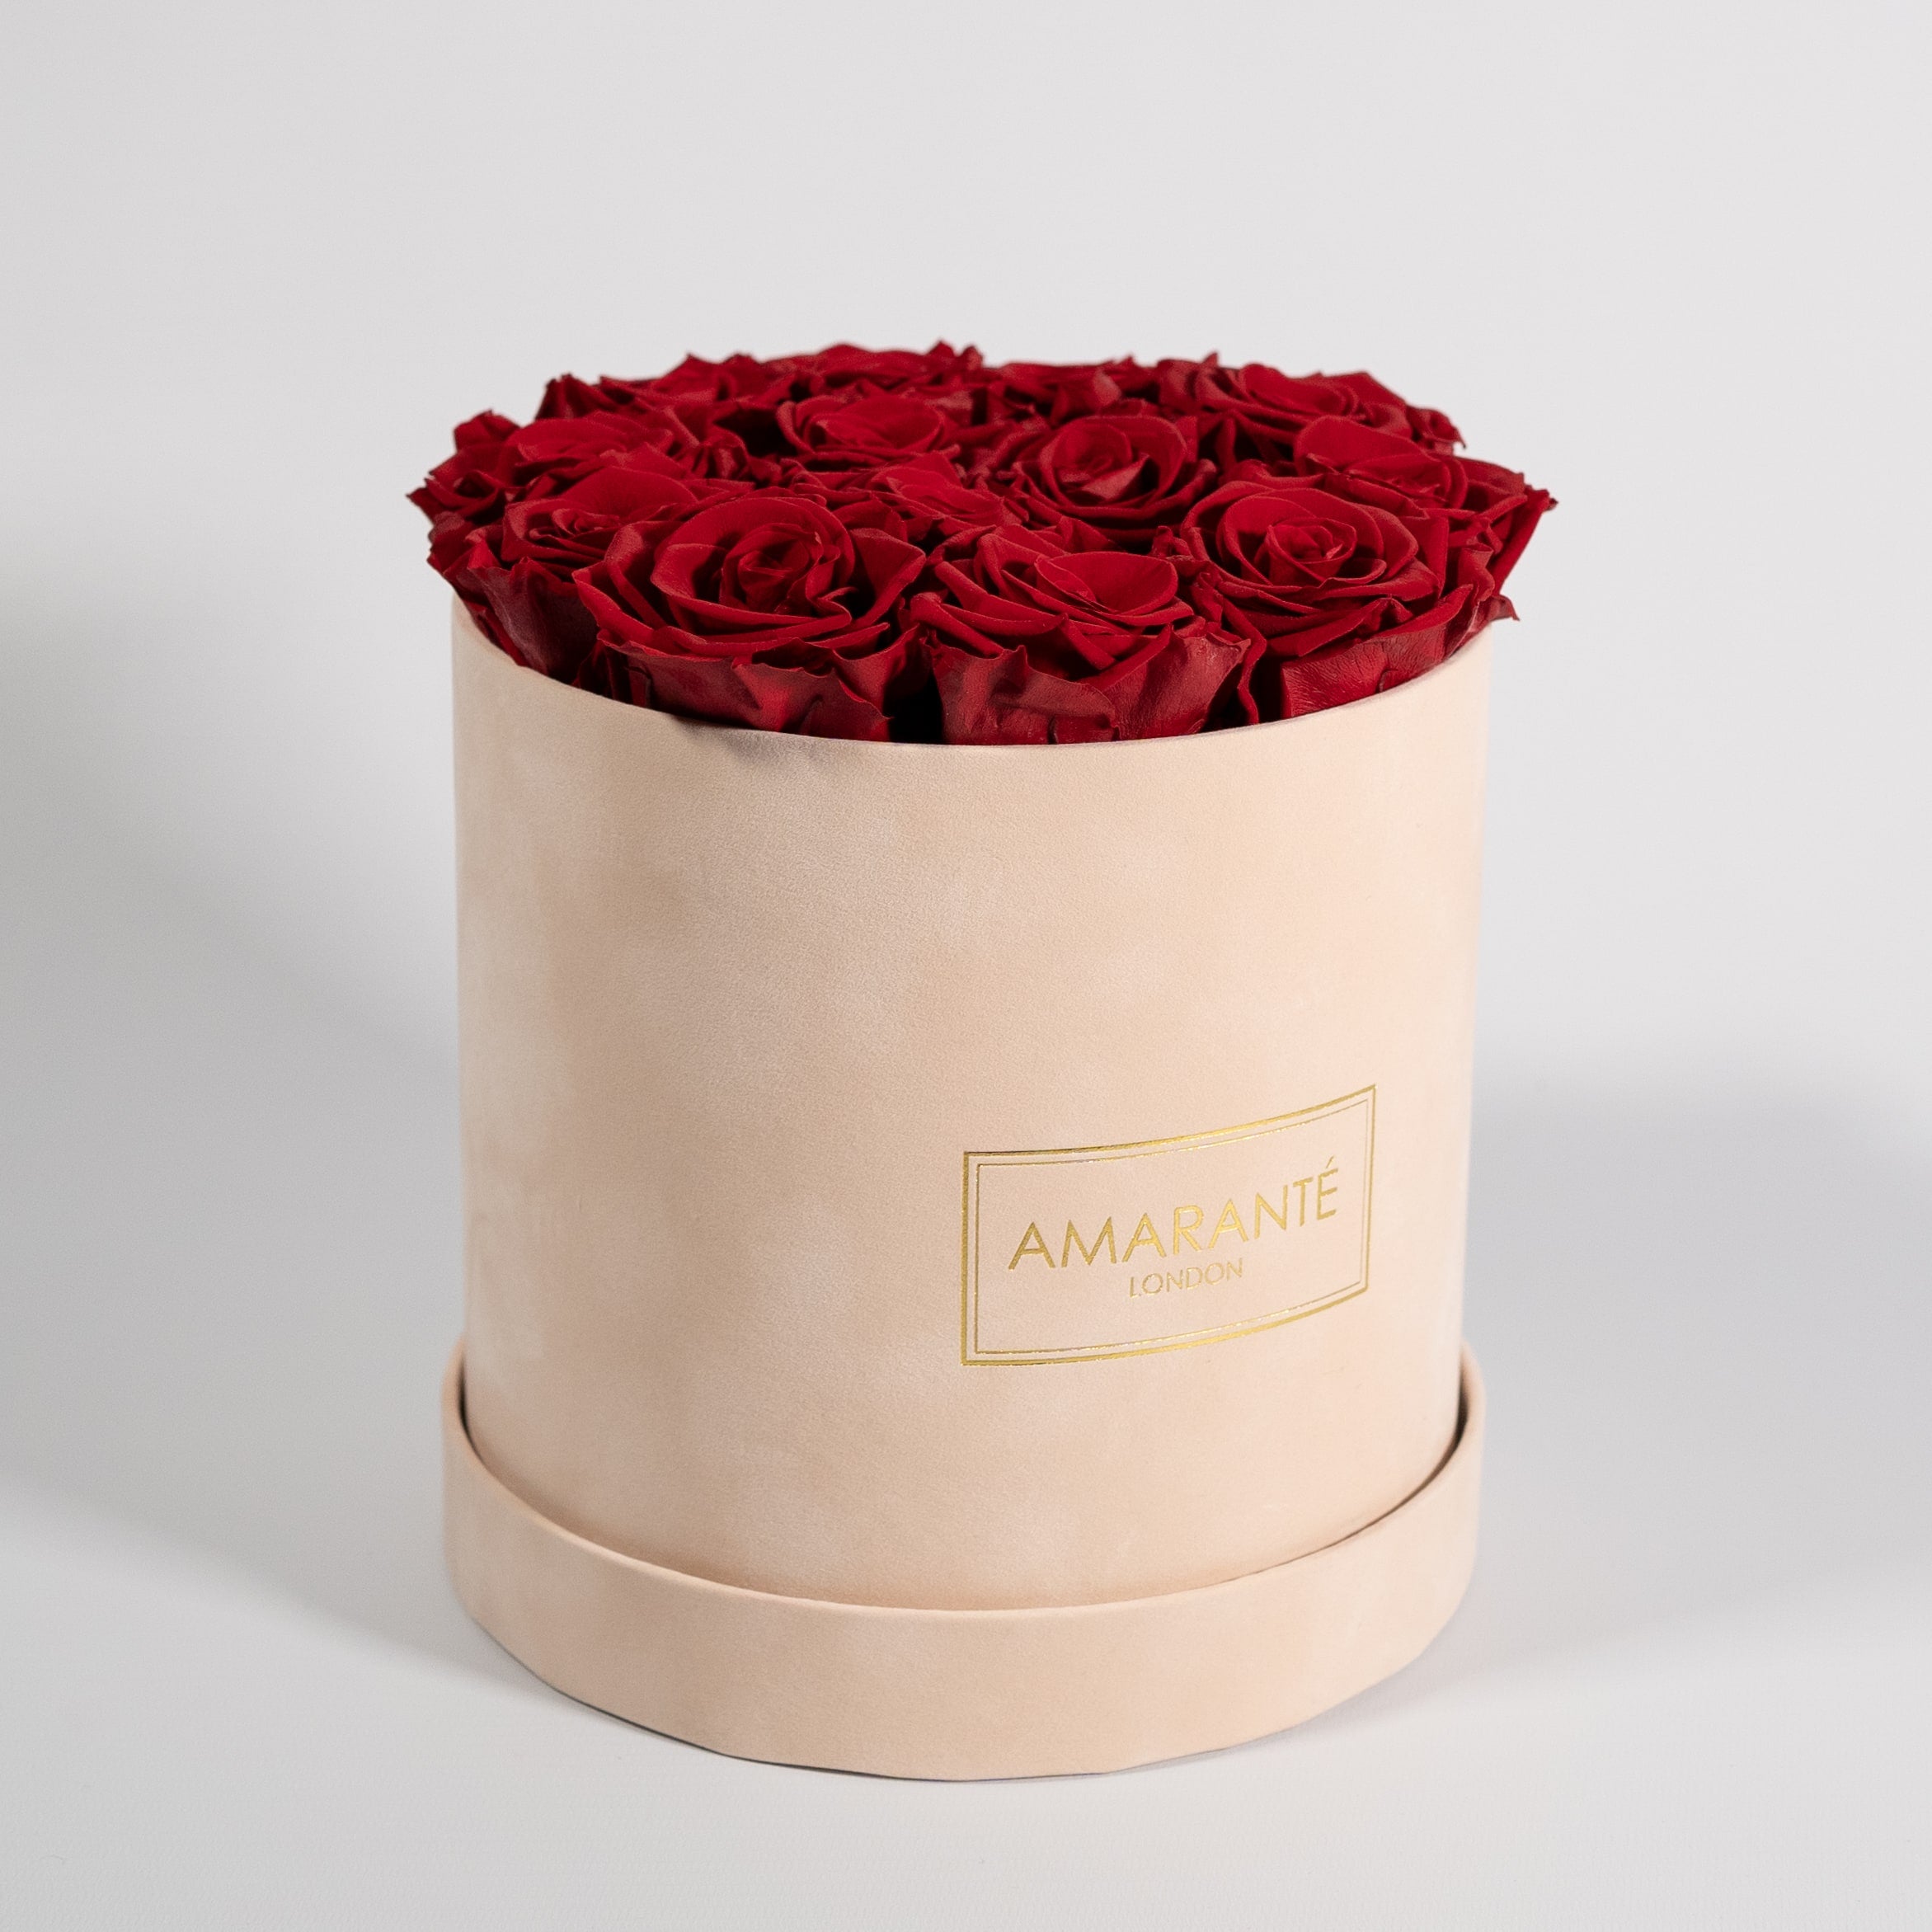 Majestic beige box featuring beautiful wine red roses. 